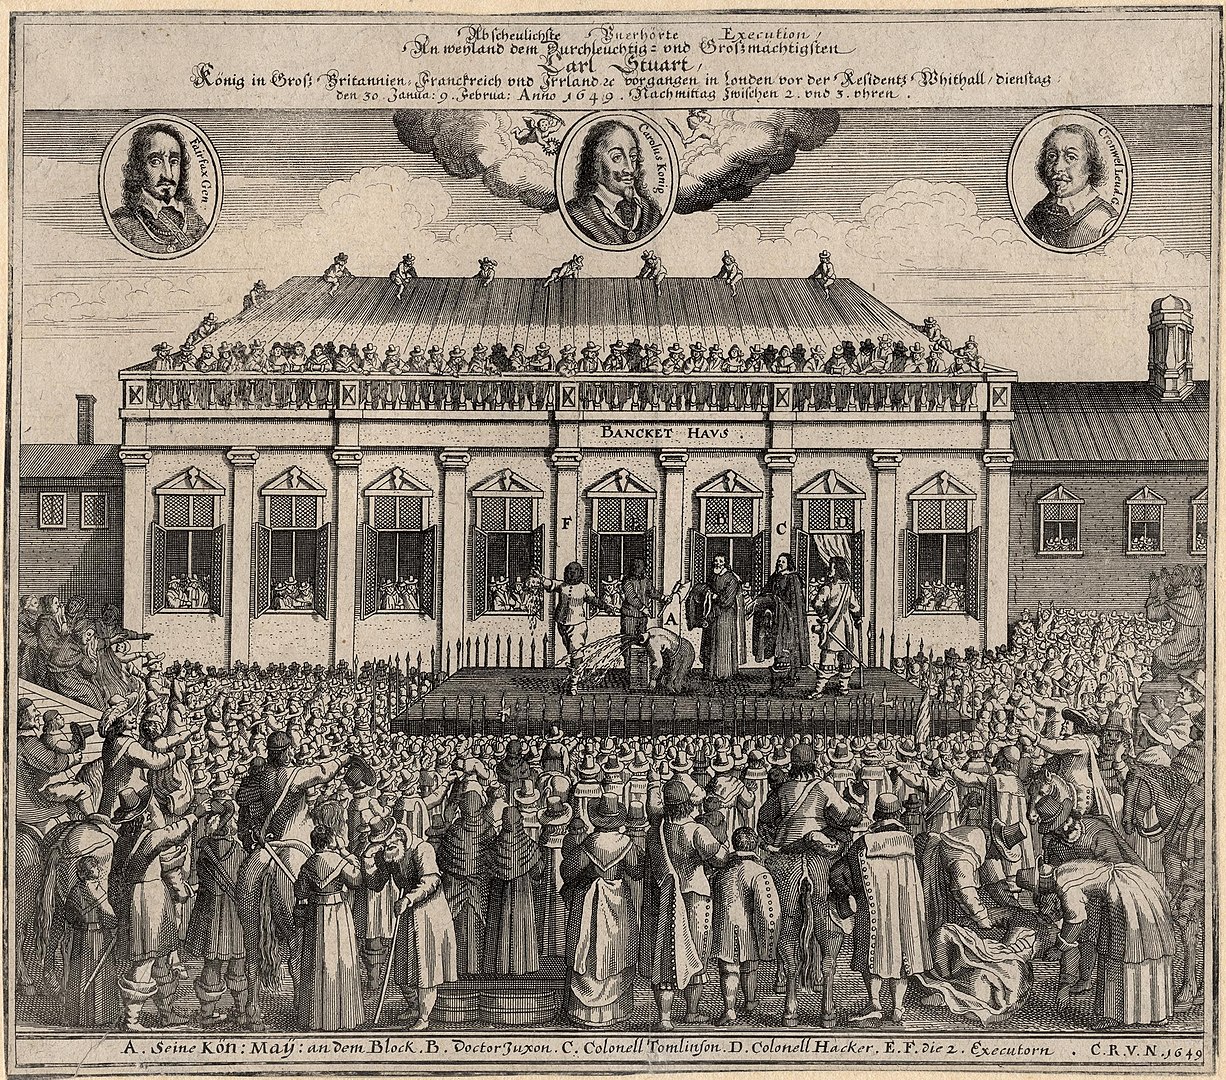 image of Charles I being execute on the scaffold outside Banqueting House